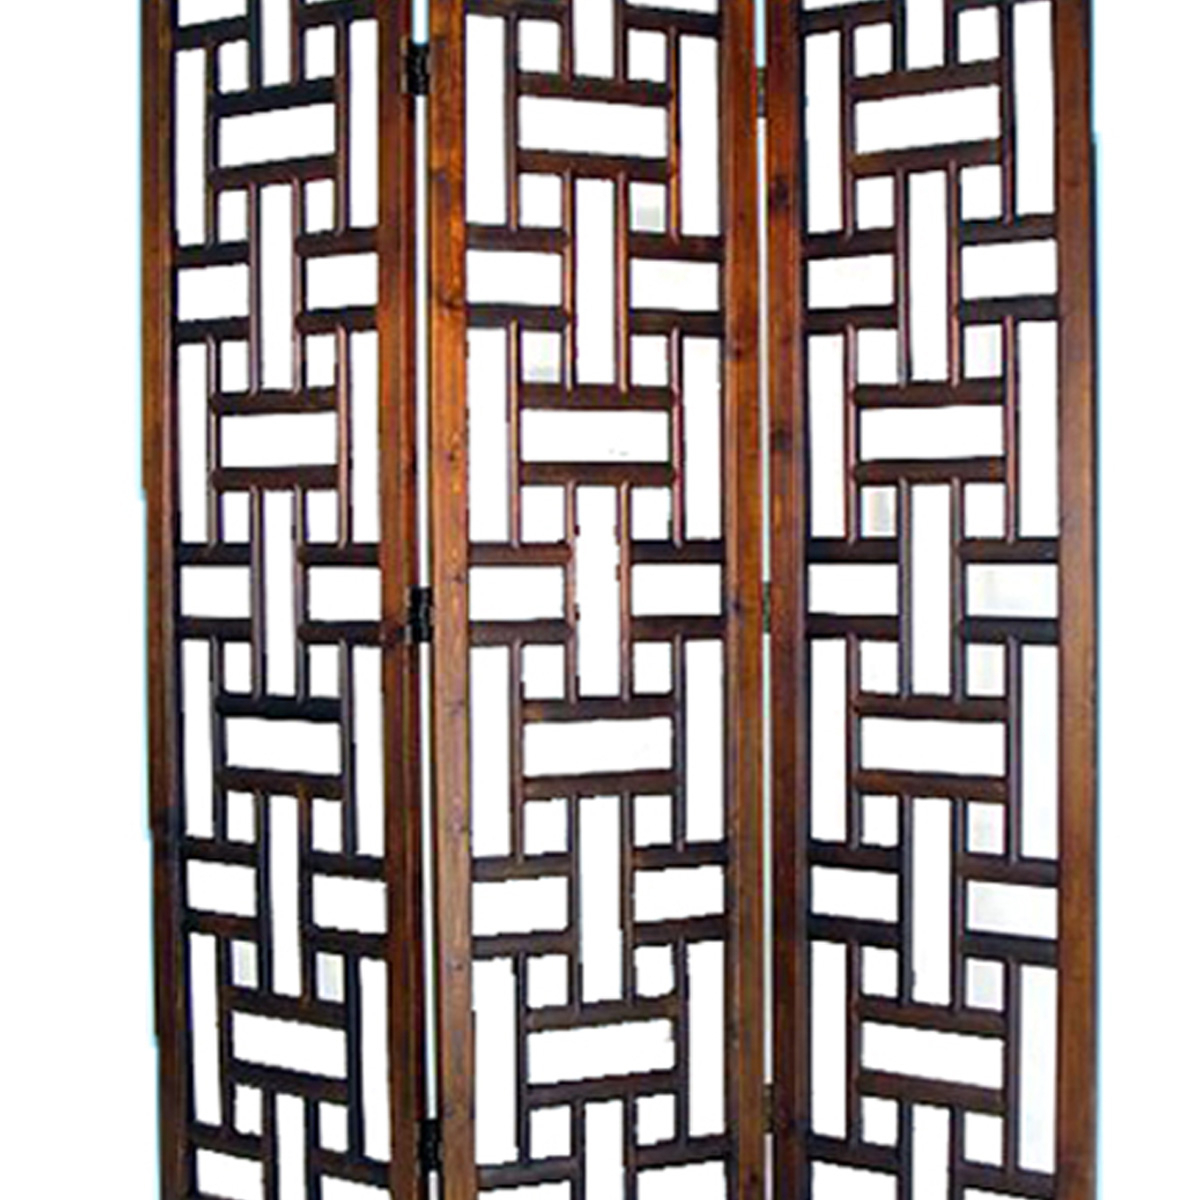 Wooden 3 Panel Room Divider With Cut Out Rectangle Pattern, Brown- Saltoro Sherpi